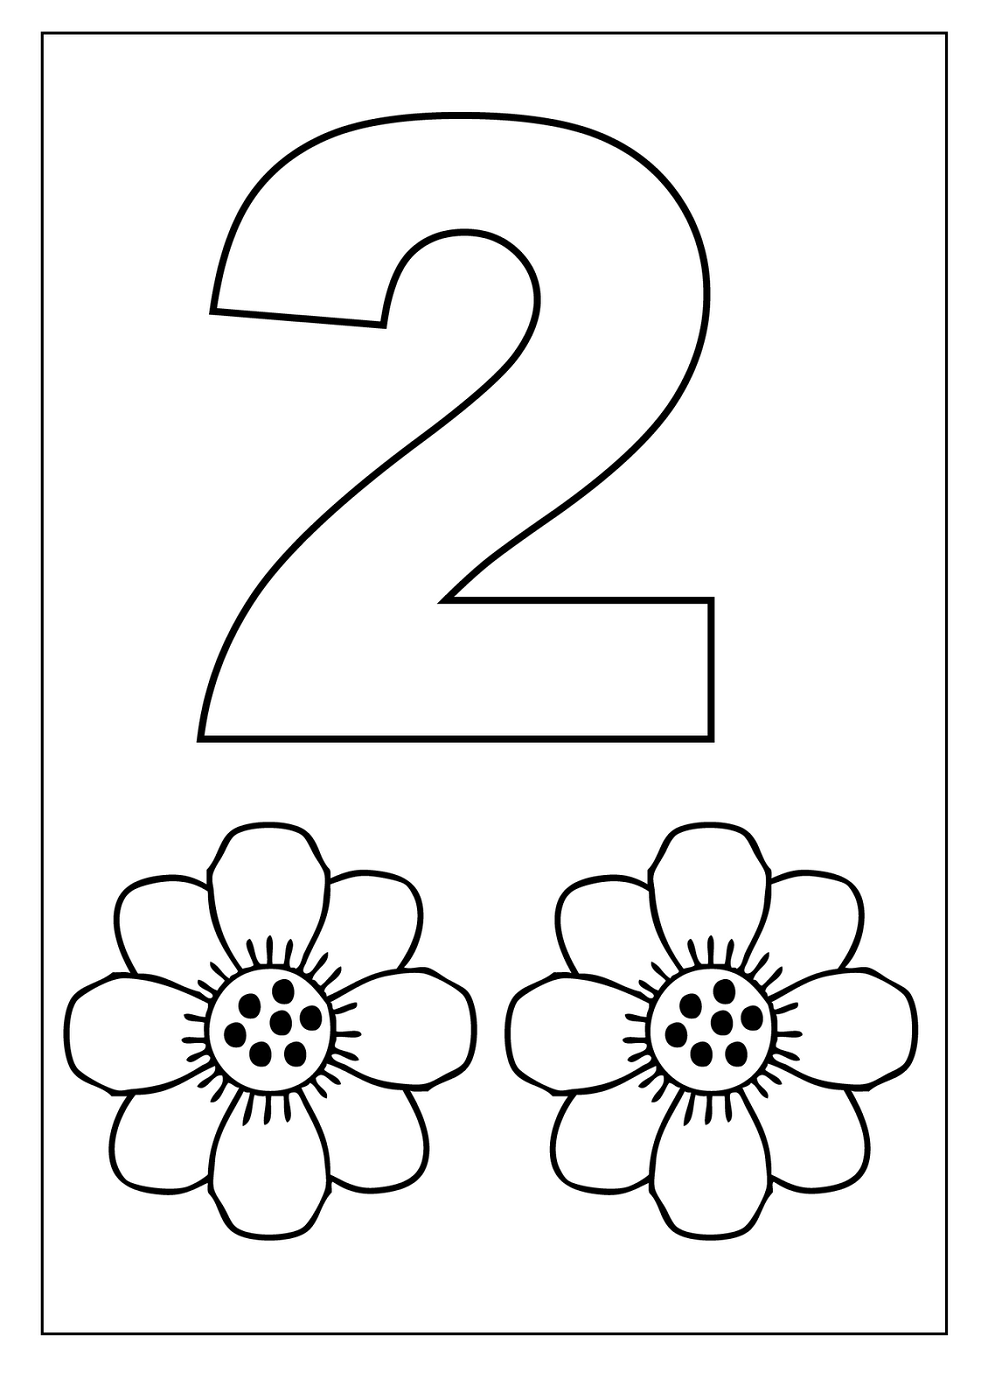 Number 2 Worksheets For 2 Year Olds